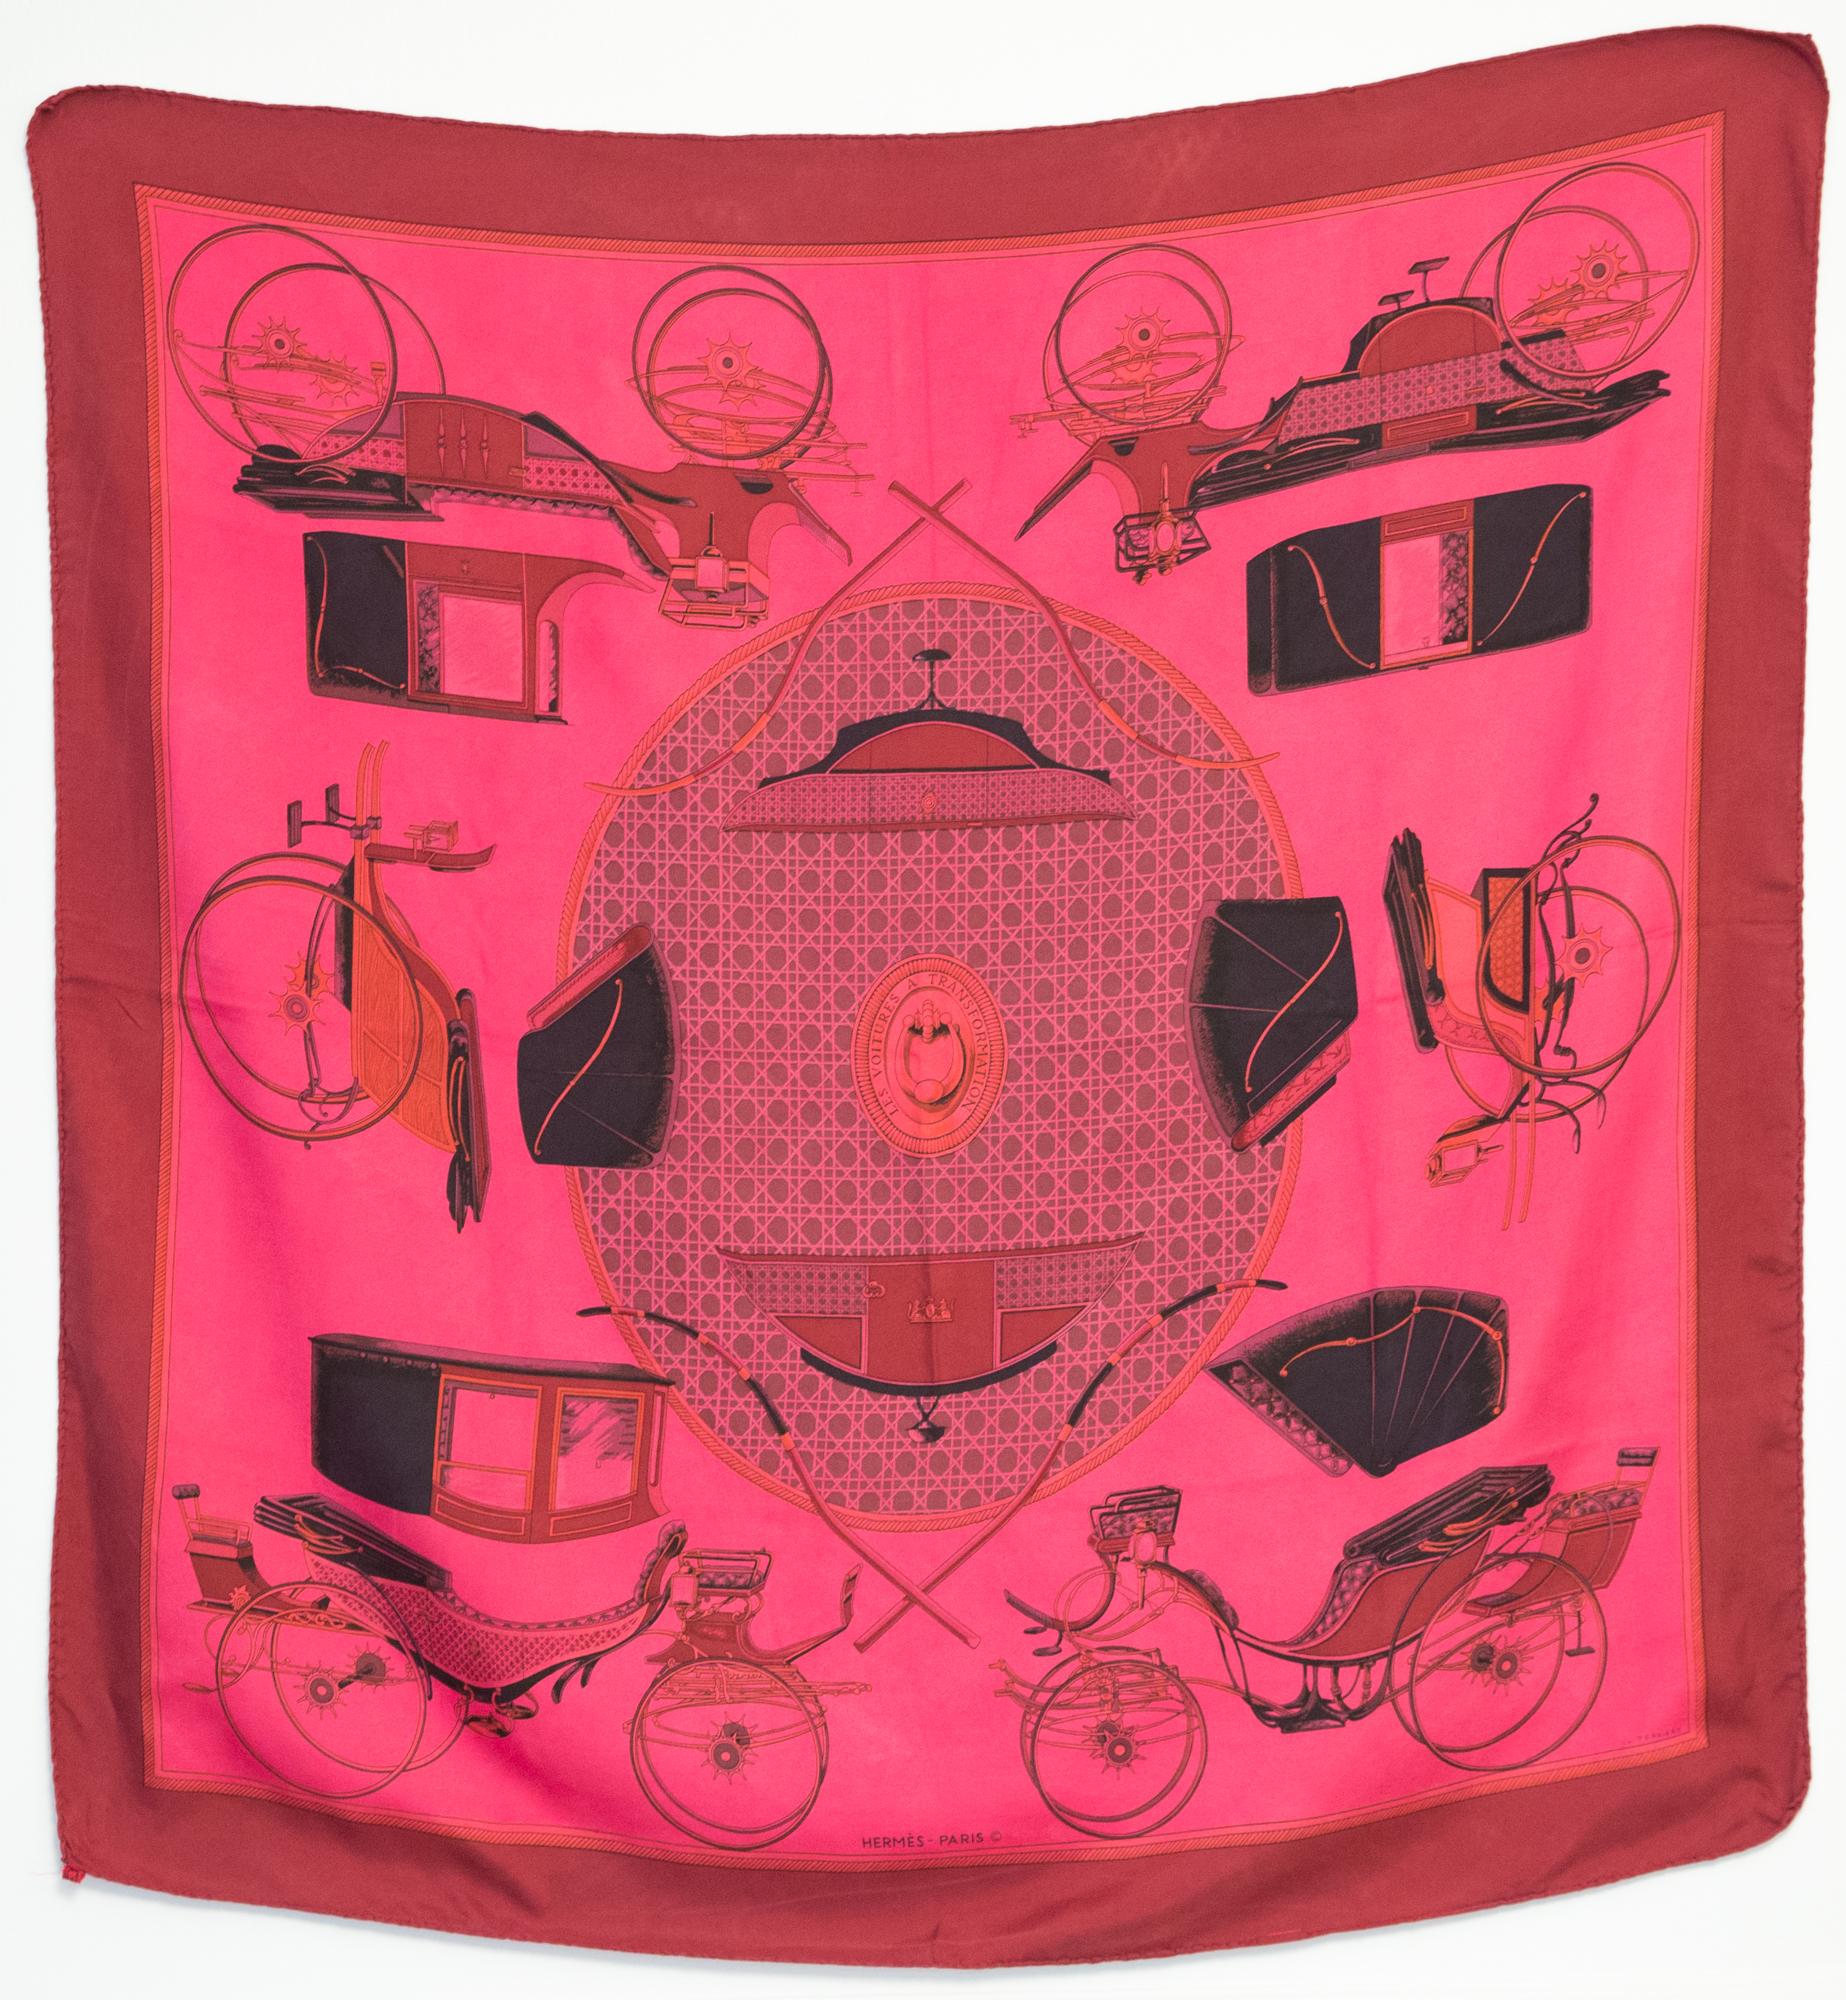 Hermes Voitures a Transformations by F. de la Perriere Silk Scarf 2